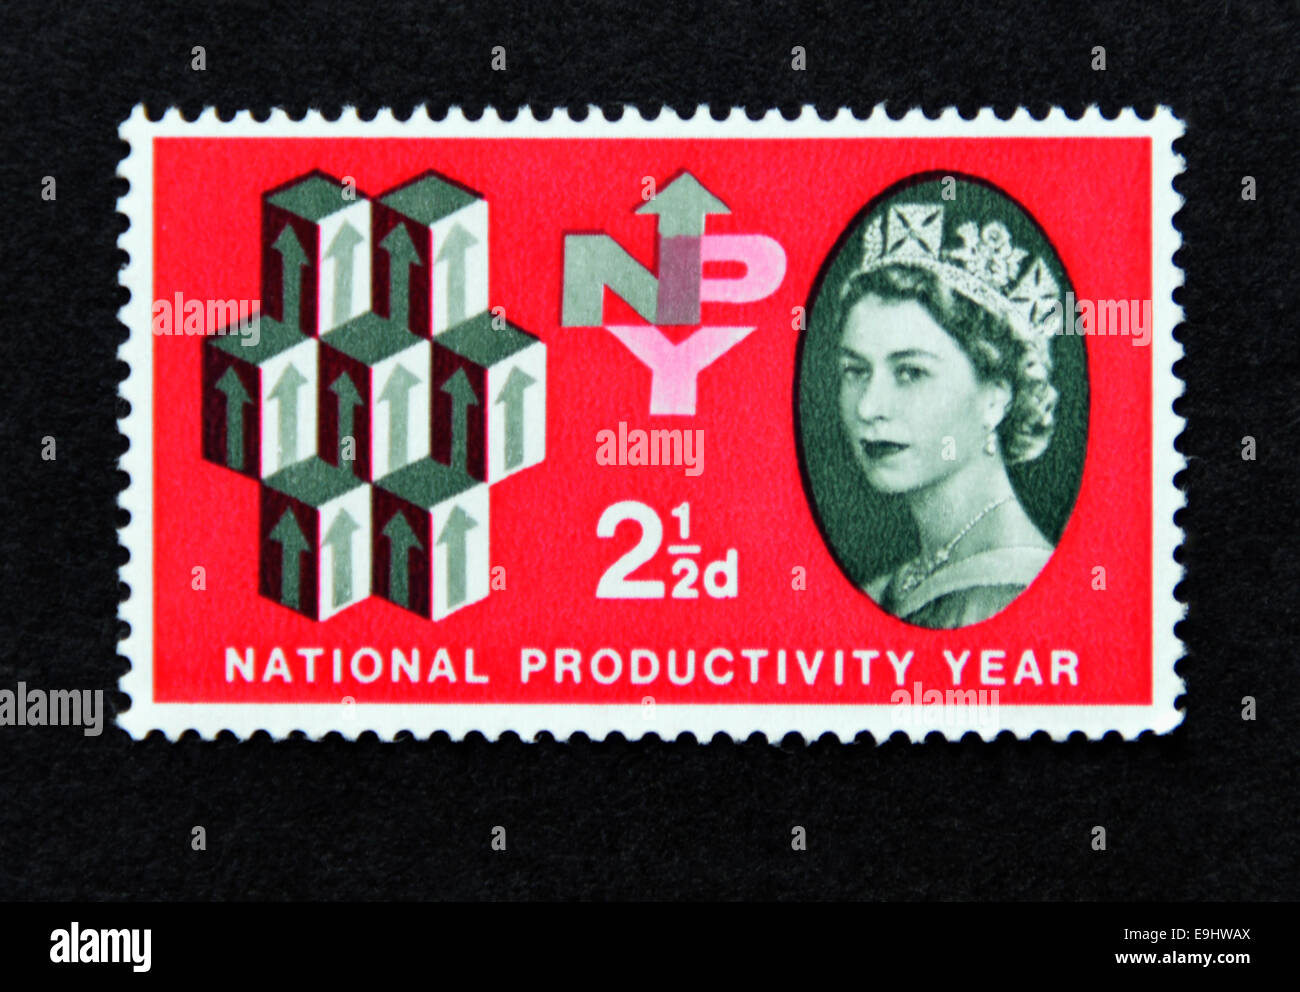 Postage stamp. Great Britain. Queen Elizabeth II. National Productivity Year (NPY). 1962. Stock Photo